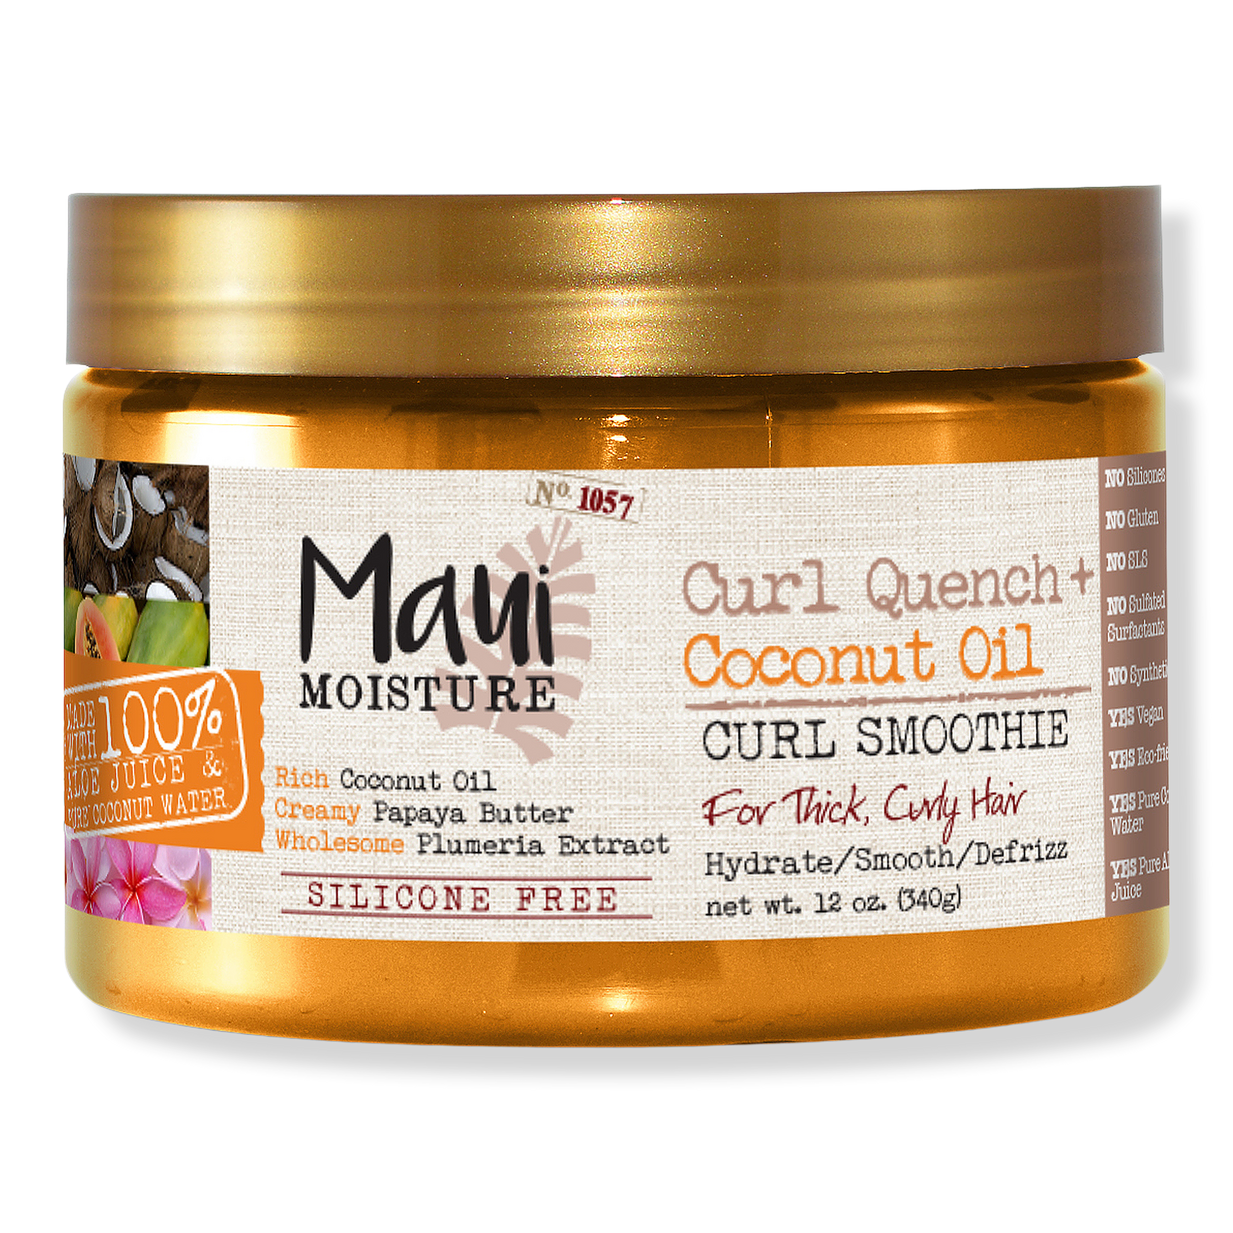 Curl Quench+Coconut Oil Curl SMOOTHIE - Maui | Ulta